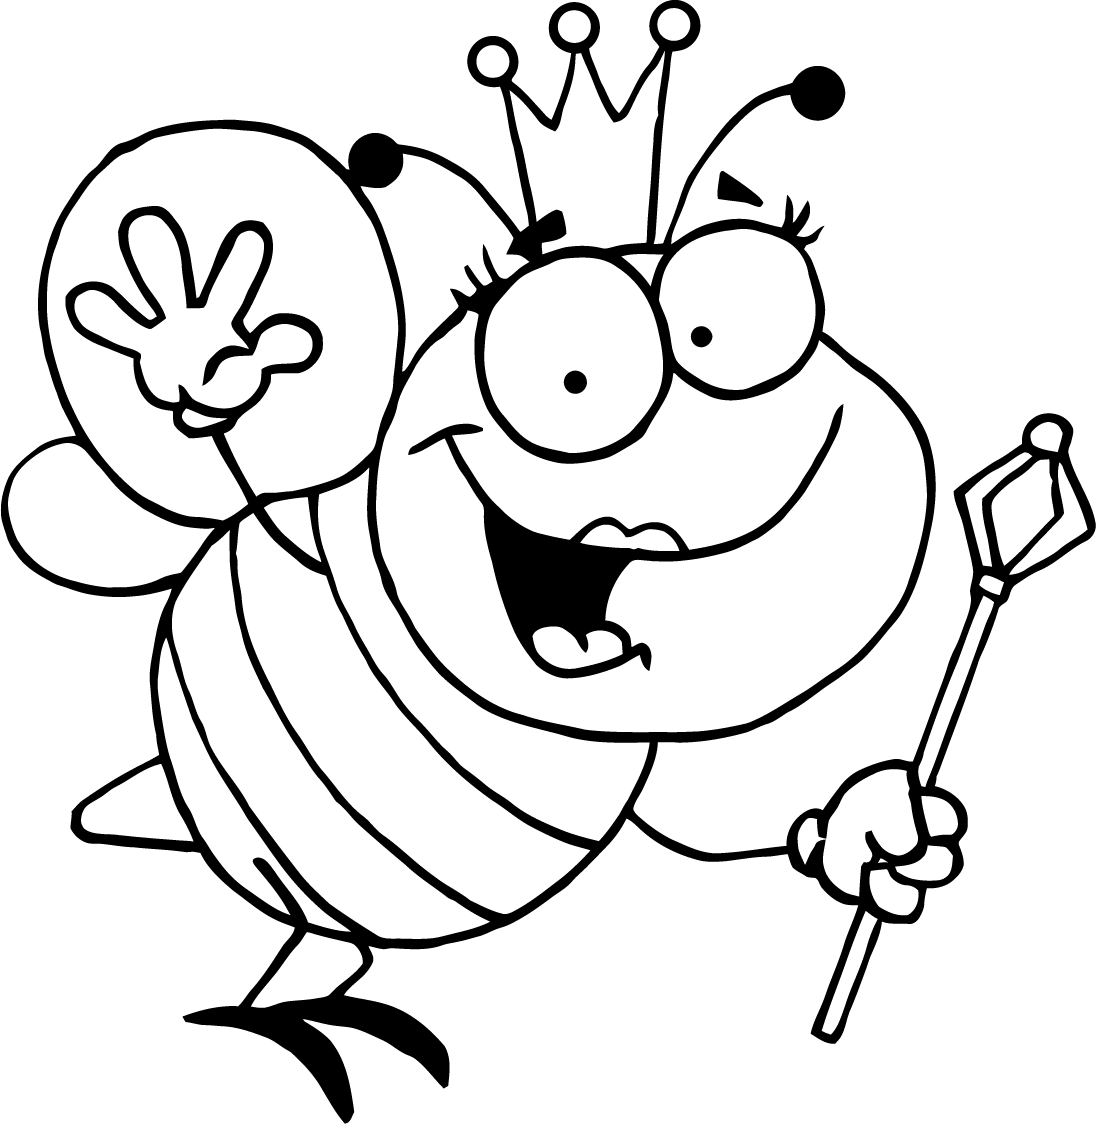 Bees coloring #8, Download drawings